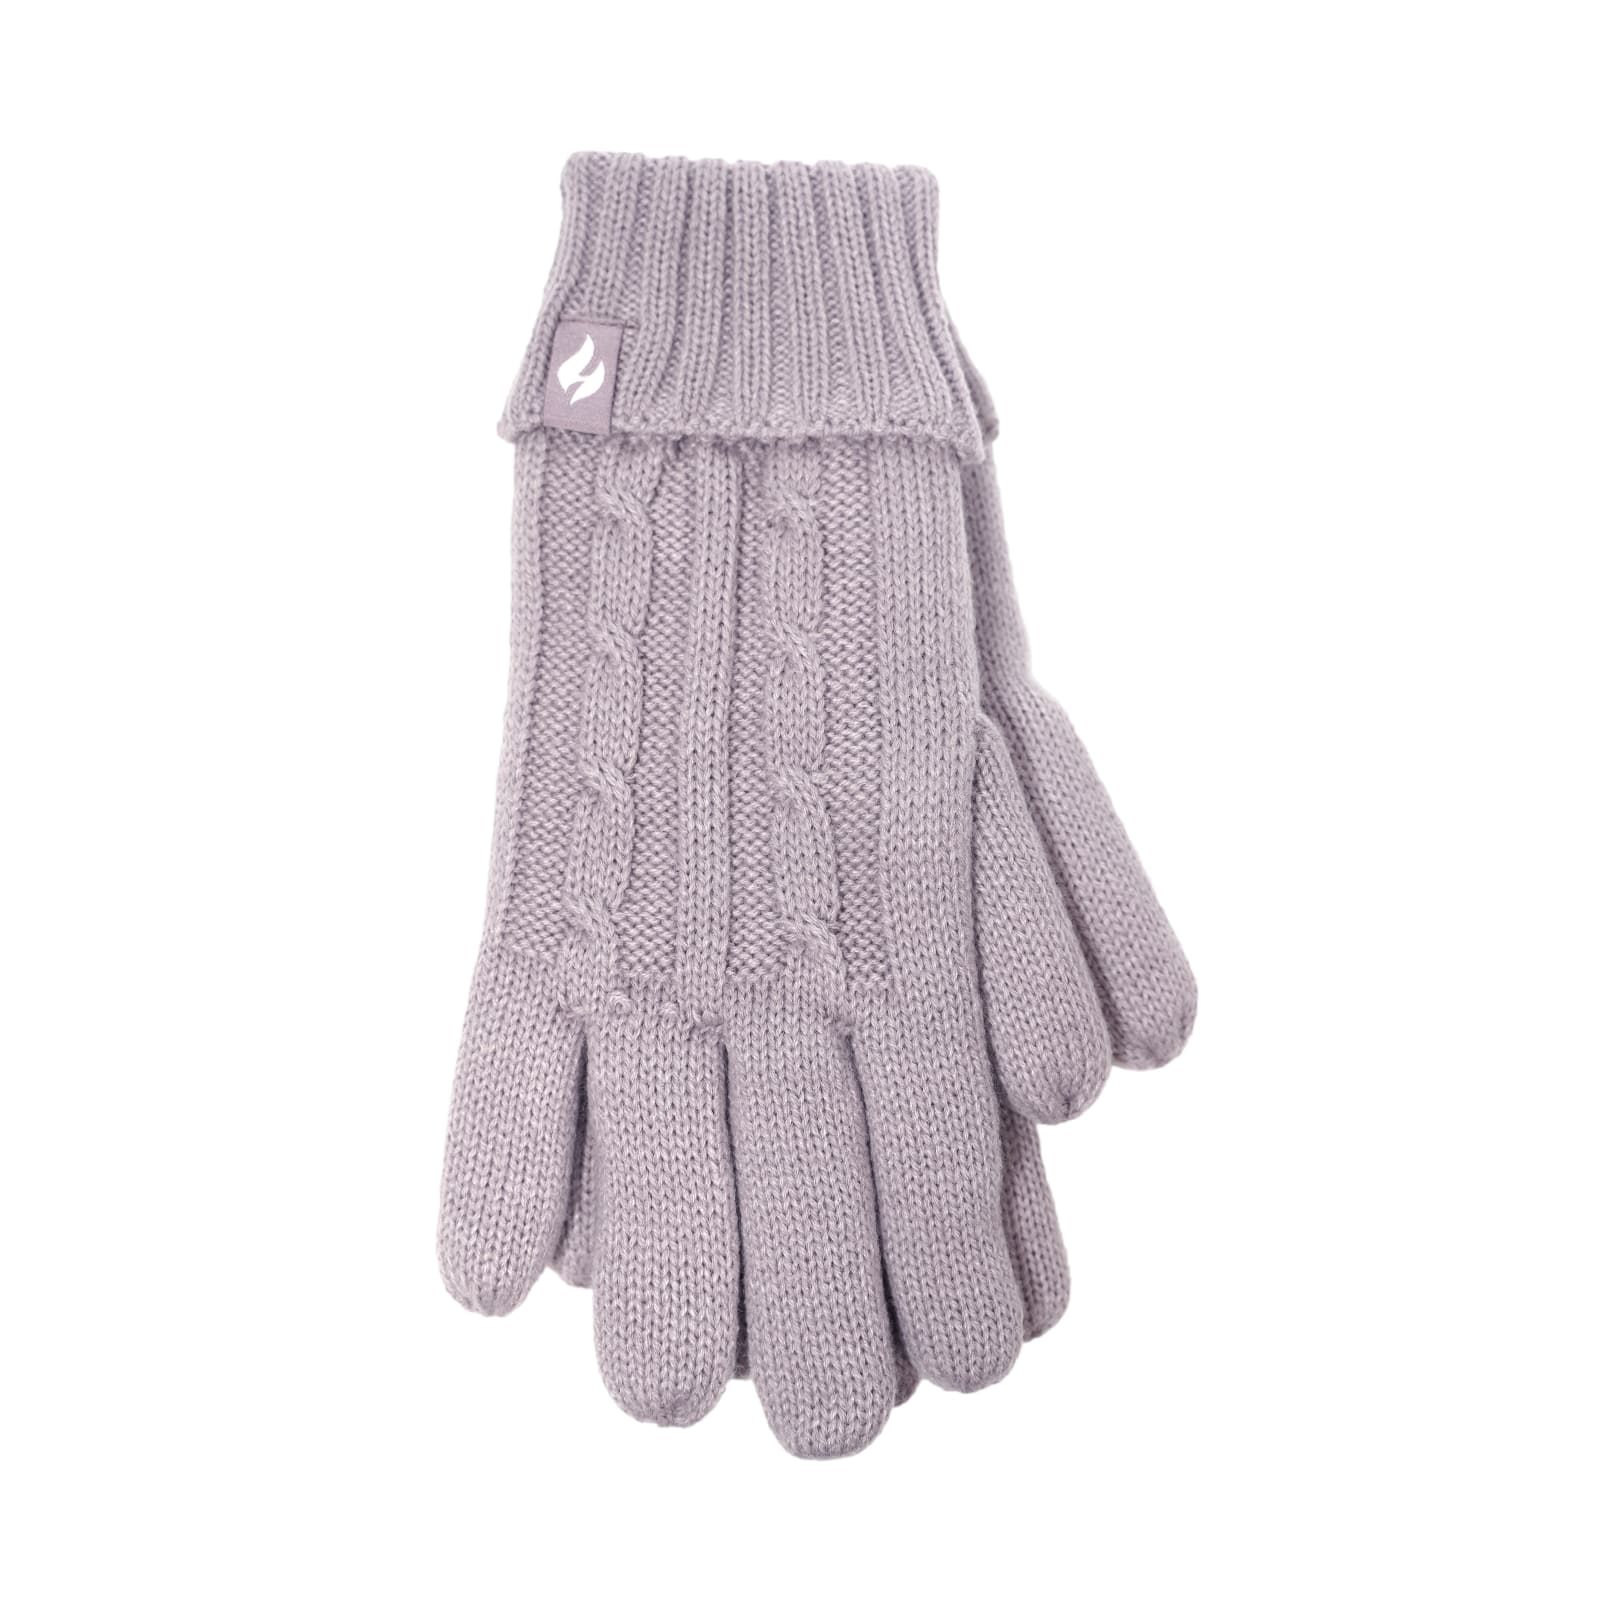 Ladies' Lilac Amelia Cable Knit Gloves by Heat Holders at Fleet Farm